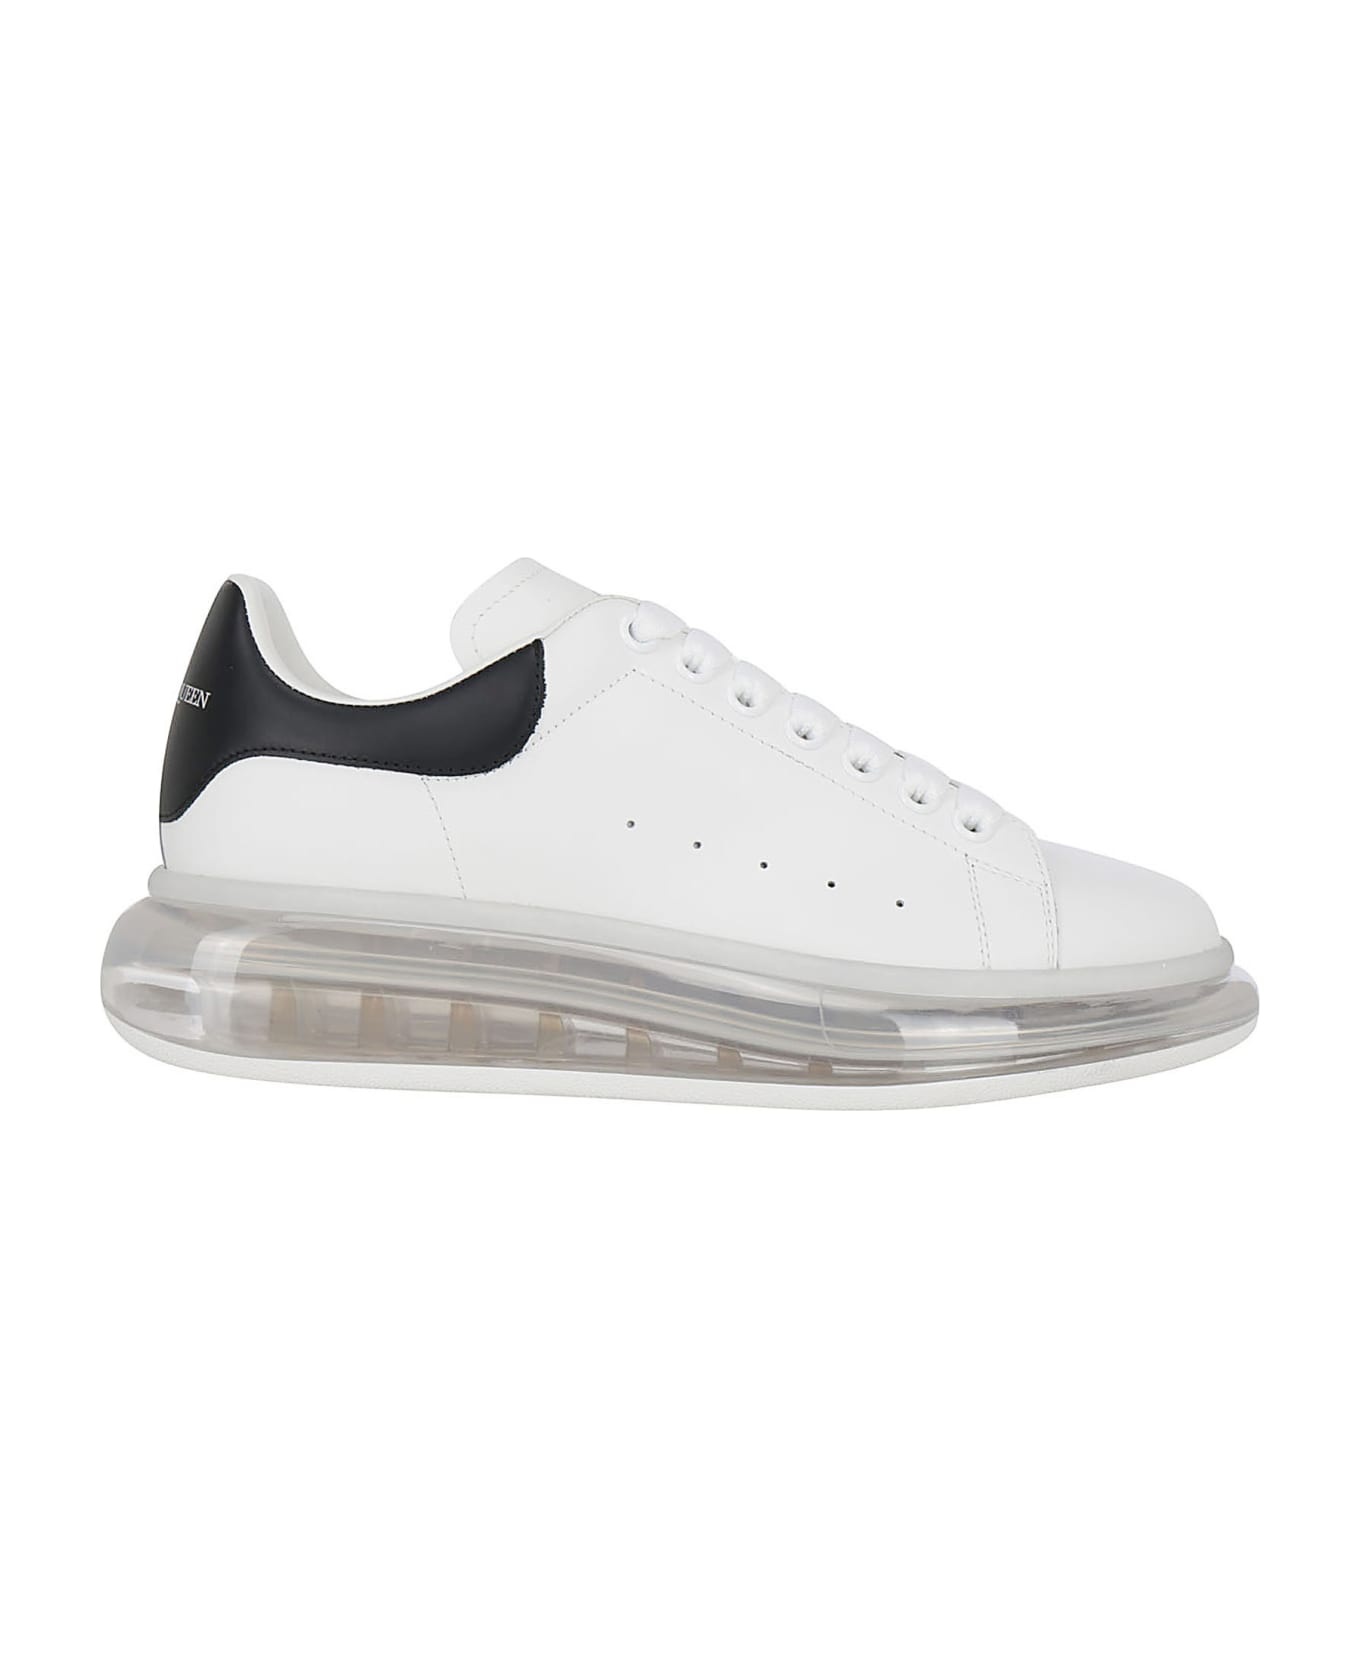 Oversized Sneakers In Leather With Contrasting Inserts - 2